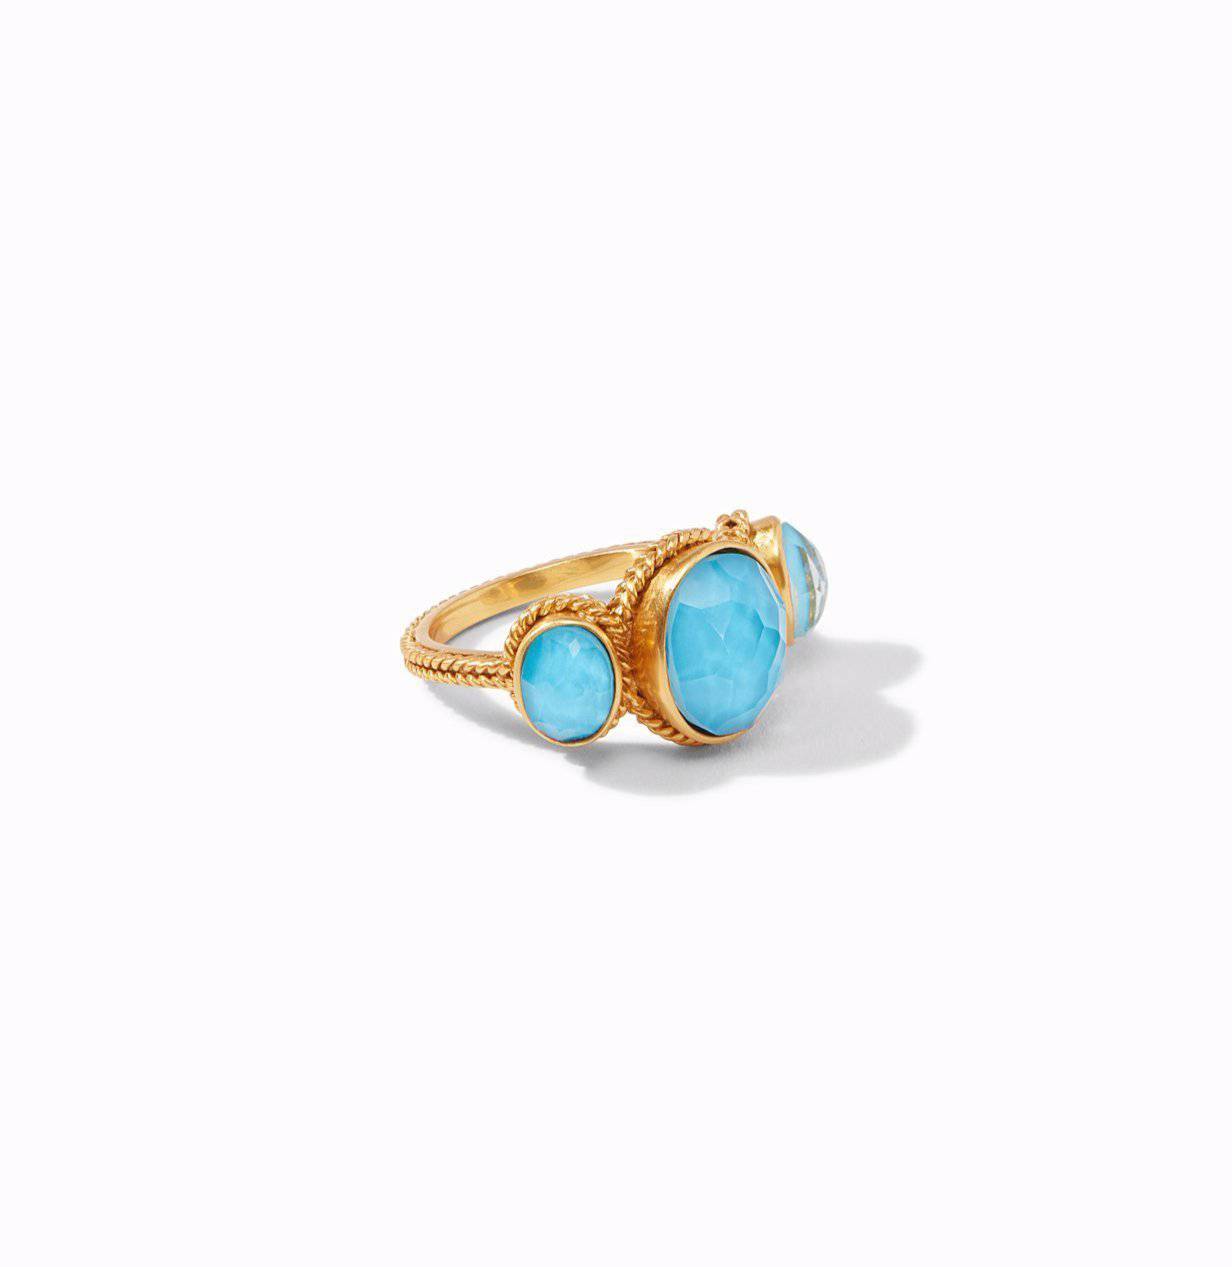 Julie Vos - Julie Vos Calypso Ring with Iridescent Pacific Blue Stones - Little Miss Muffin Children & Home